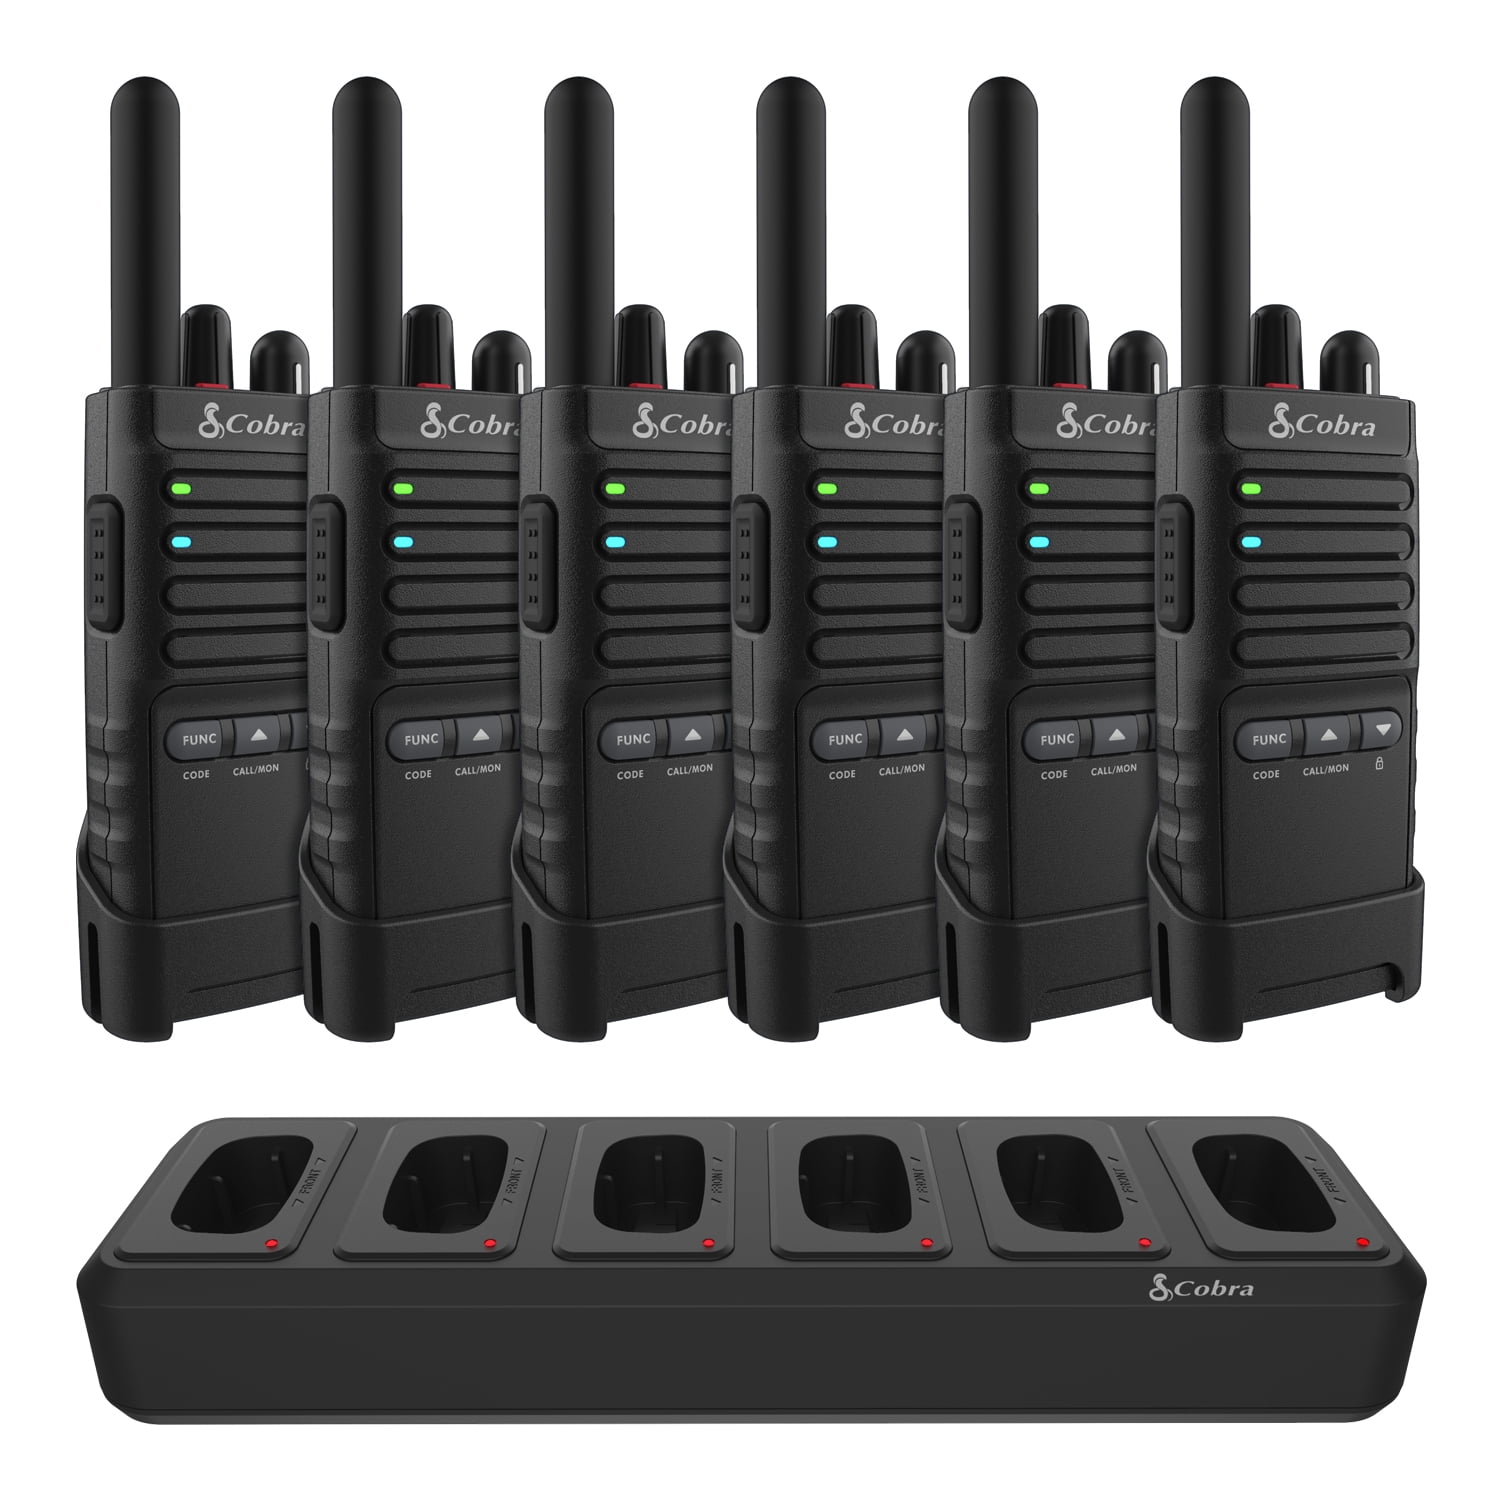 earthquake athlete liquid Cobra PDX655 Pro Business 2W FRS Two-Way Radios (6-Pack) and Charging Dock  | Walkie Talkies for Business with range up to 300,000 Sq Ft. & 25 Floors |  22 Channels | Unlimited Expandability - Walmart.com